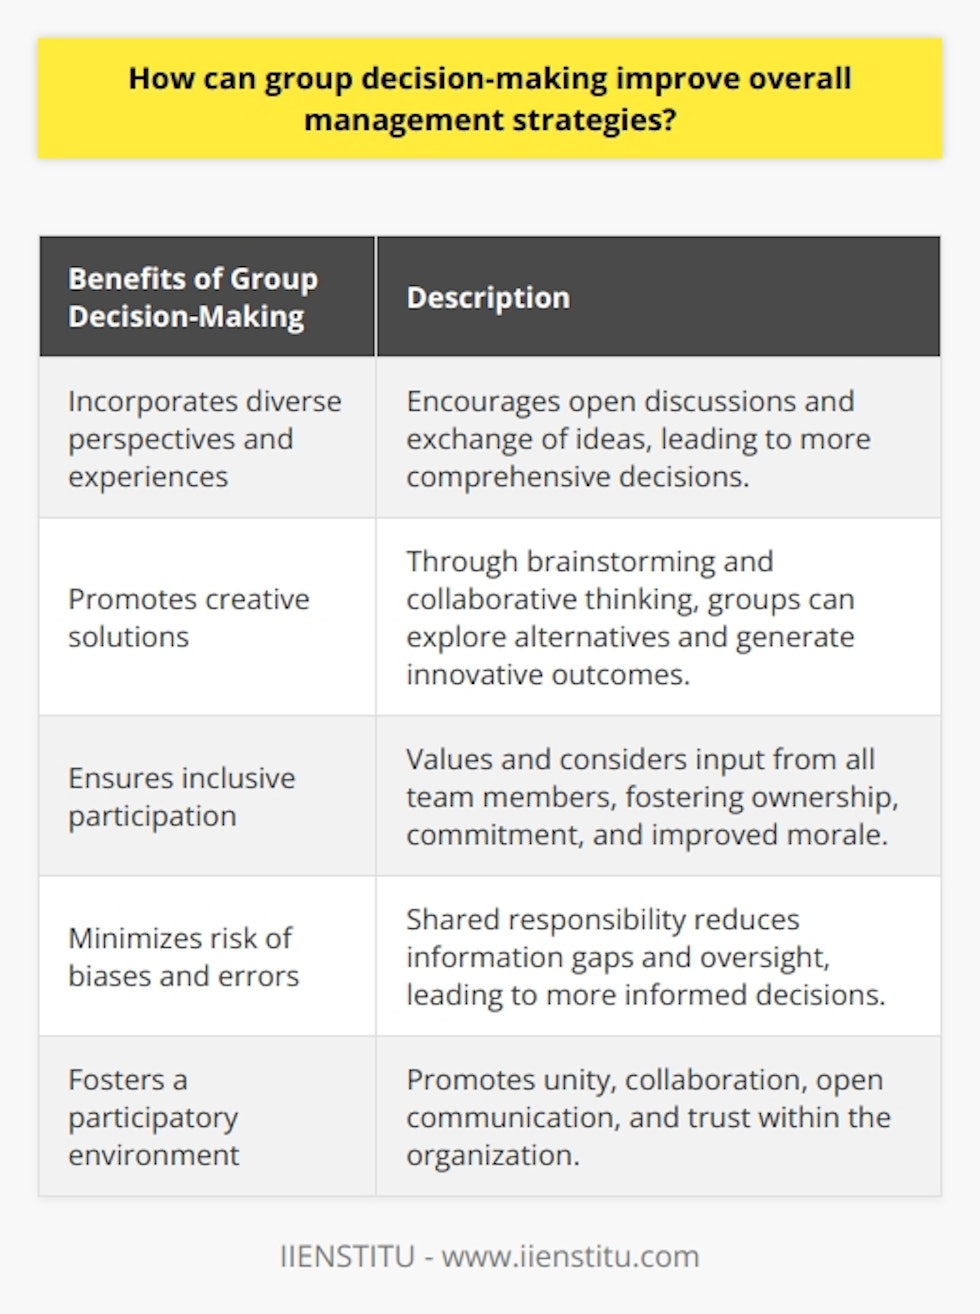 How can group decision-making improve overall management strategies? Group decision-making can enhance overall management strategies in several ways. One crucial advantage is how it incorporates diverse perspectives and experiences. When individuals come together in a group setting, they bring their unique insights to the table. This diversity encourages open discussions and an exchange of ideas, ultimately resulting in more comprehensive decisions. By considering multiple perspectives, group decision-making can foresee potential problems and identify innovative solutions.Another advantage of group decision-making is its ability to promote creative solutions. Through brainstorming and collaborative thinking, groups can explore a variety of alternatives in a dynamic manner. This process often leads to the generation of innovative outcomes, allowing organizations to stay ahead of their competitors. By developing unique management strategies, companies can redefine industry standards and maintain their competitive edge.Furthermore, group decision-making ensures inclusive participation. It involves valuing and considering each team member's input, fostering a sense of ownership and commitment. When employees feel included in the decision-making process, they are more motivated and invested in implementing the management strategies successfully. Inclusive decision-making empowers employees and leads to stronger buy-in and improved morale within the organization.Group decision-making also minimizes the risk of biases and errors. By considering multiple perspectives, the shared responsibility in decision-making reduces the possibility of information gaps and oversight. This approach promotes better risk management and helps the organization make more informed decisions. Additionally, the diverse backgrounds and expertise of group members allow for the evaluation of situations from different angles, reducing potential blind spots and improving the overall quality of decisions.Lastly, group decision-making fosters a participatory environment that strengthens the organizational culture. By involving employees in important decisions, management promotes a sense of unity and collaboration throughout the organization. This participatory approach encourages open communication and trust among employees and management. A participatory environment leads to a more resilient and high-performing workforce.In conclusion, group decision-making provides several benefits to improve overall management strategies. By incorporating diverse perspectives, promoting creative solutions, ensuring inclusive participation, minimizing risks and biases, and fostering a collaborative environment, organizations can enhance their ability to innovate, adapt, and succeed in today's competitive business landscape.